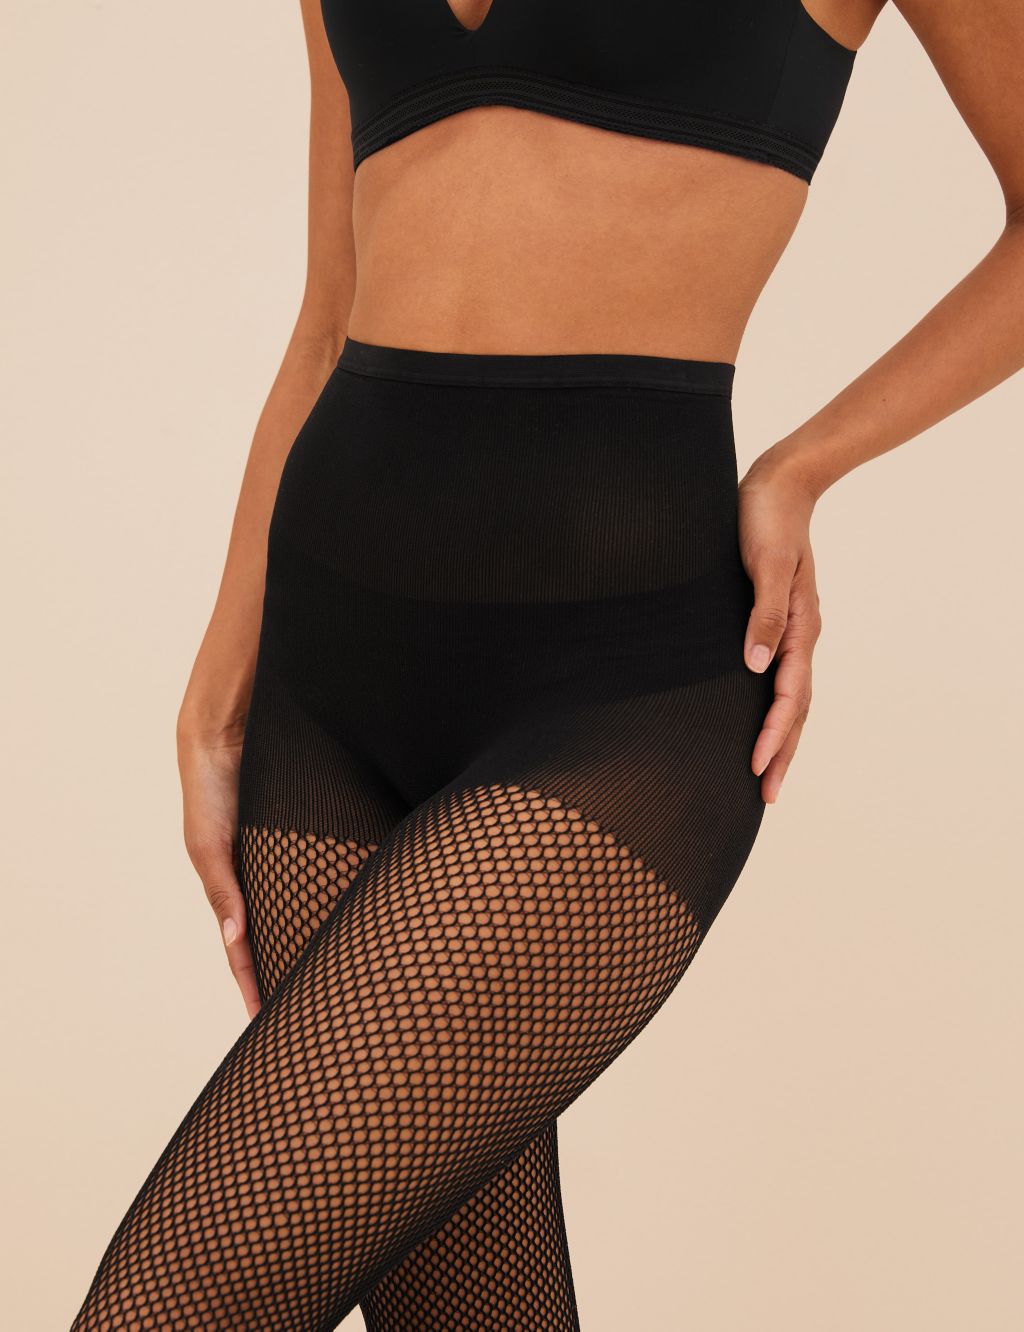 Body Shaping Fishnet Tights image 2